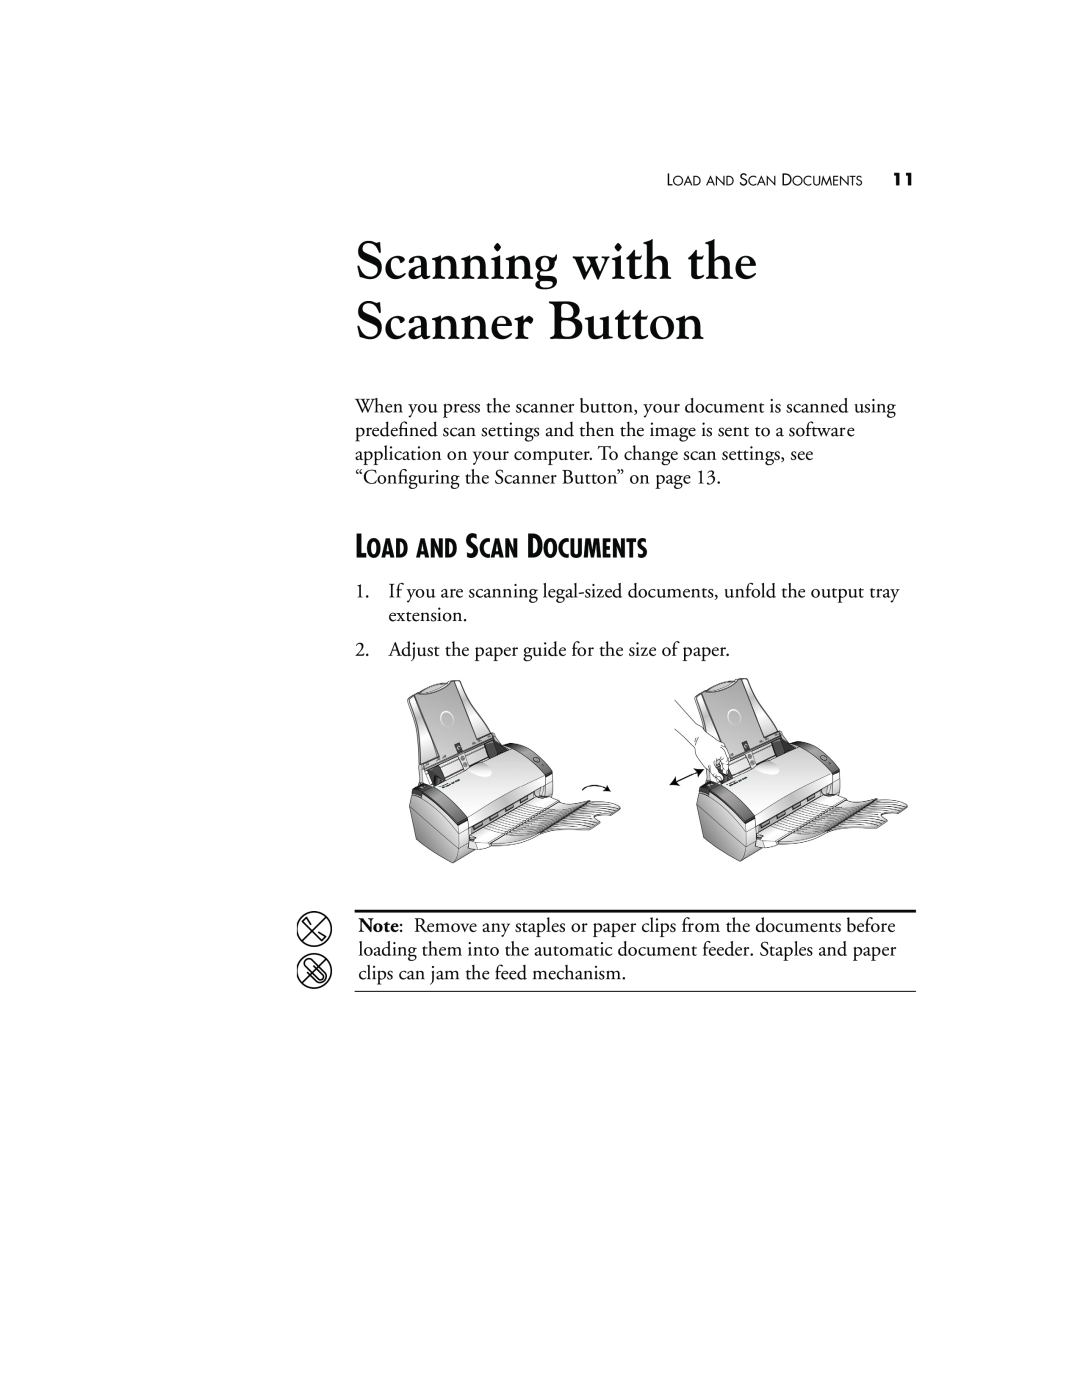 Visioneer XP 450 manual Scanning with the Scanner Button, Load And Scan Documents 